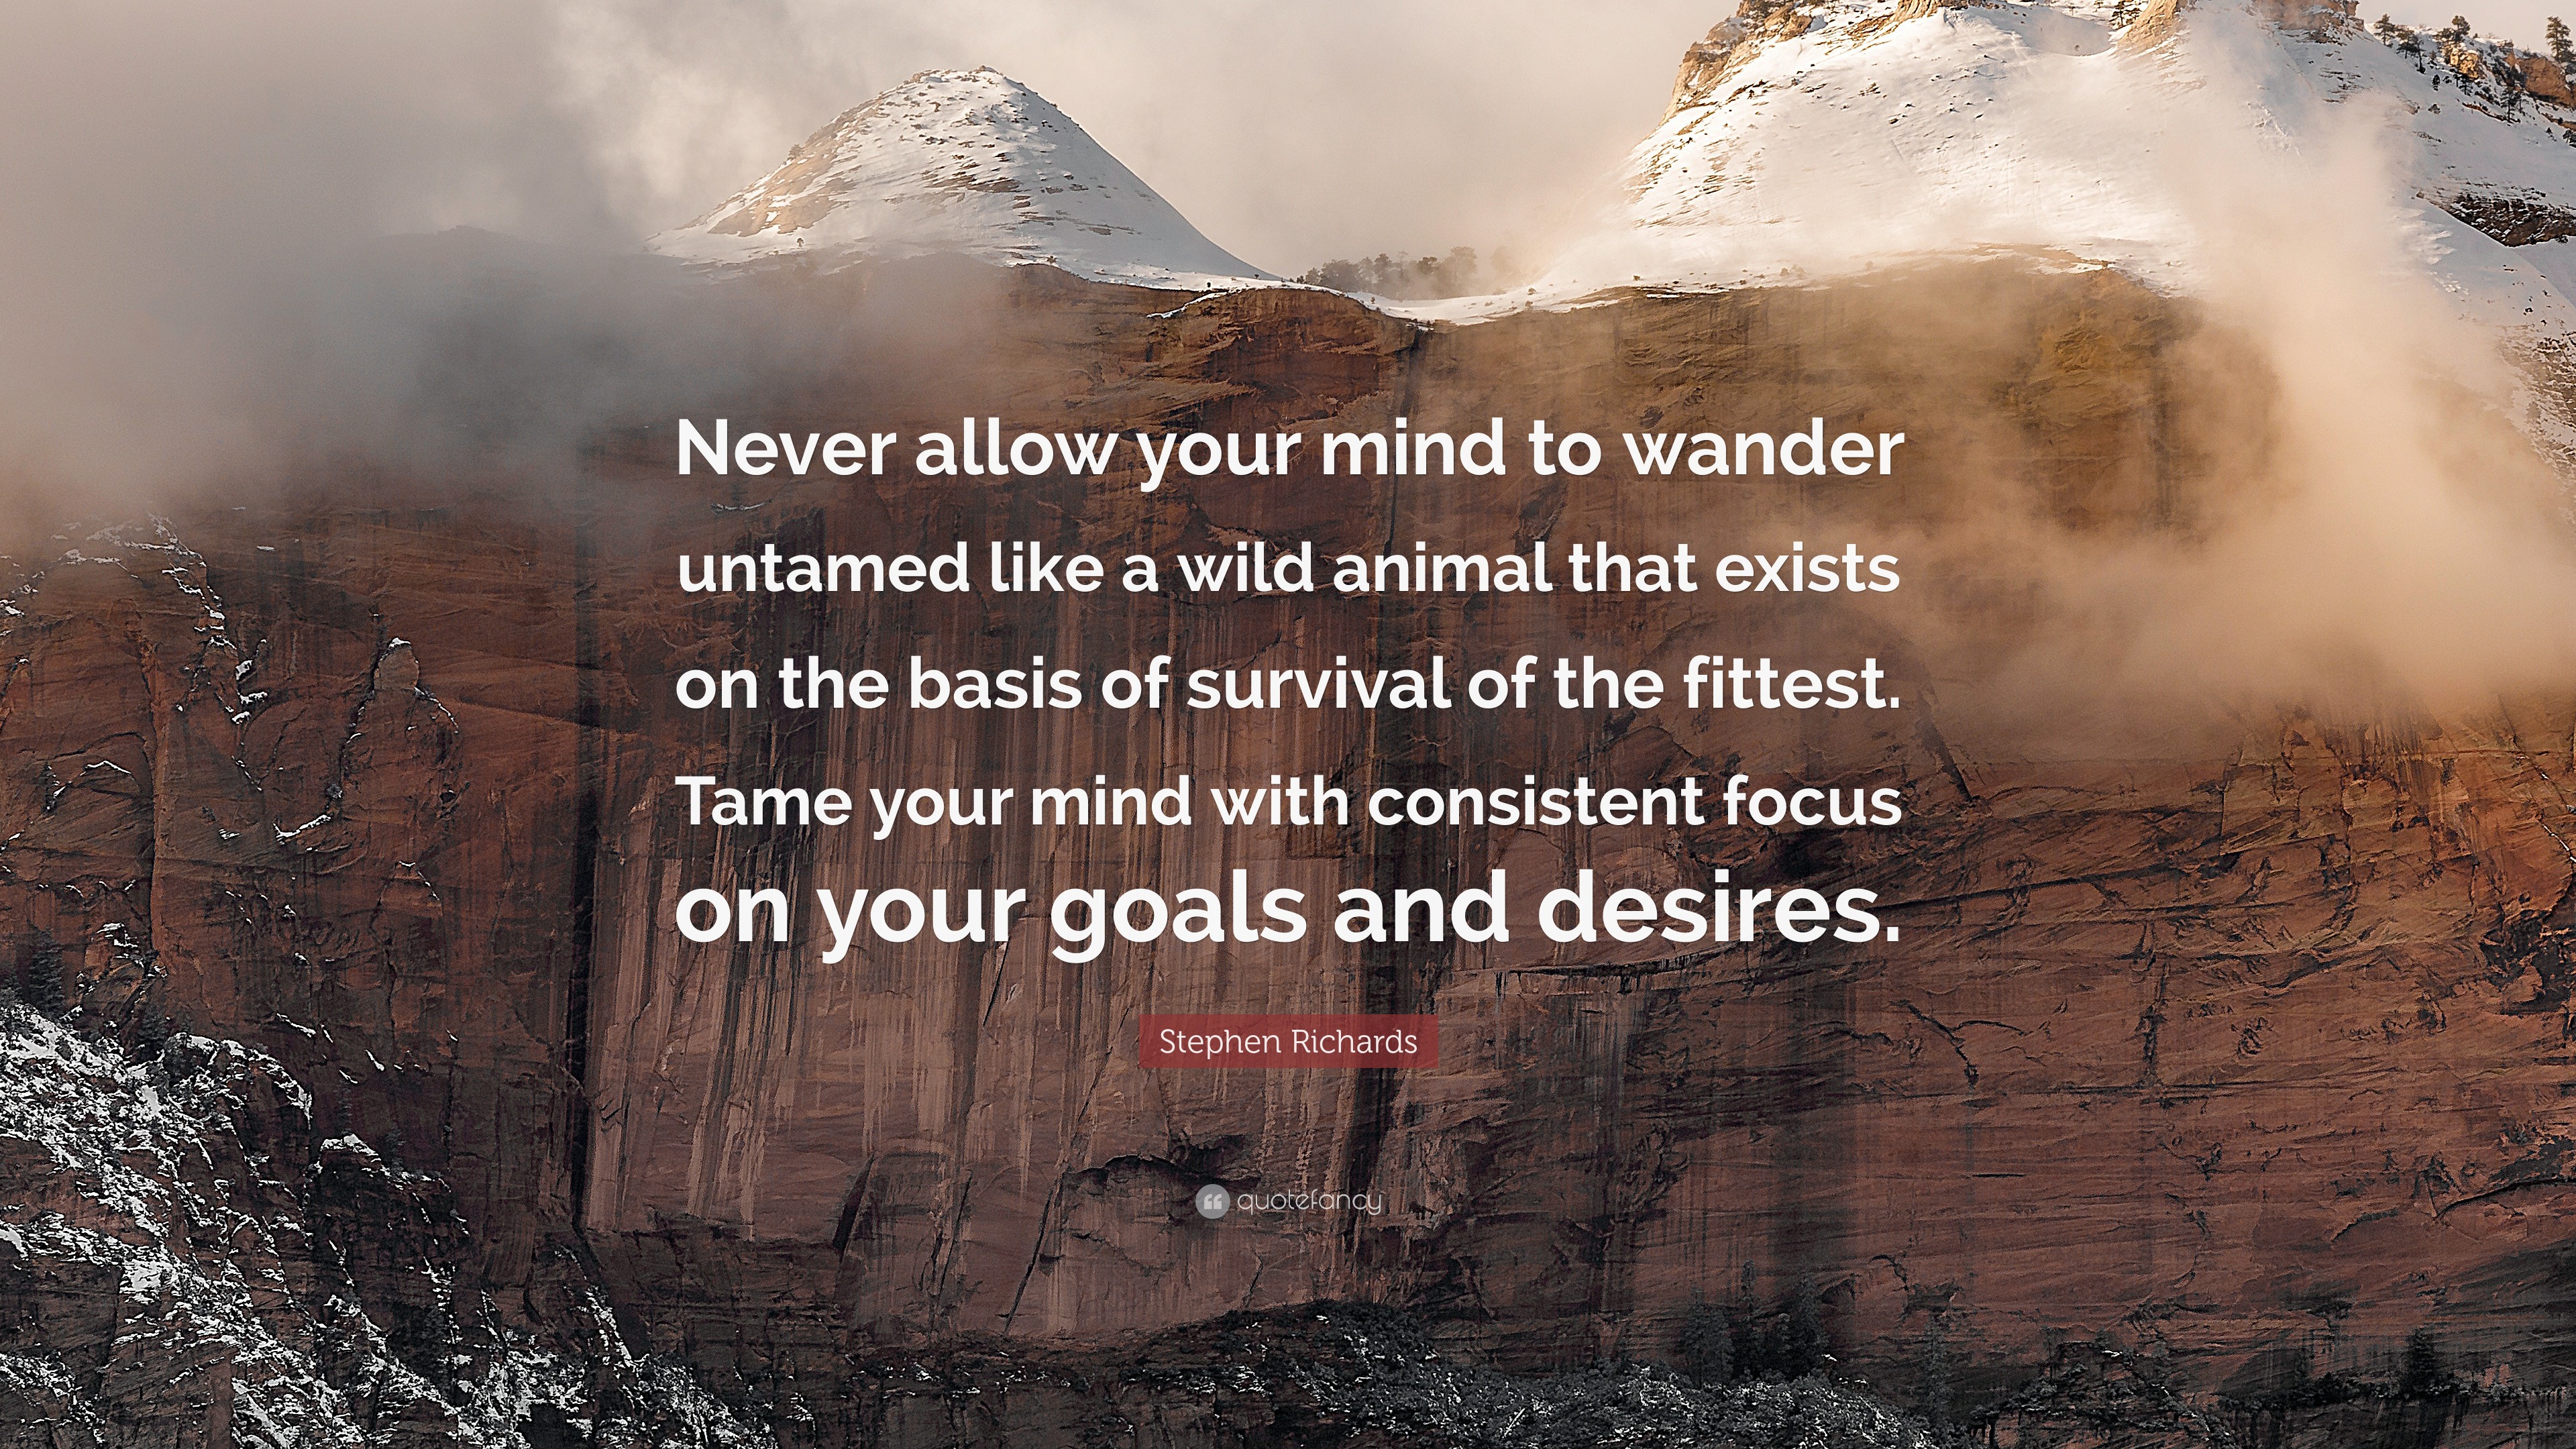 Stephen Richards Quote: “Never allow your mind to wander untamed like a wild  animal that exists on the basis of survival of the fittest. Tame you...”